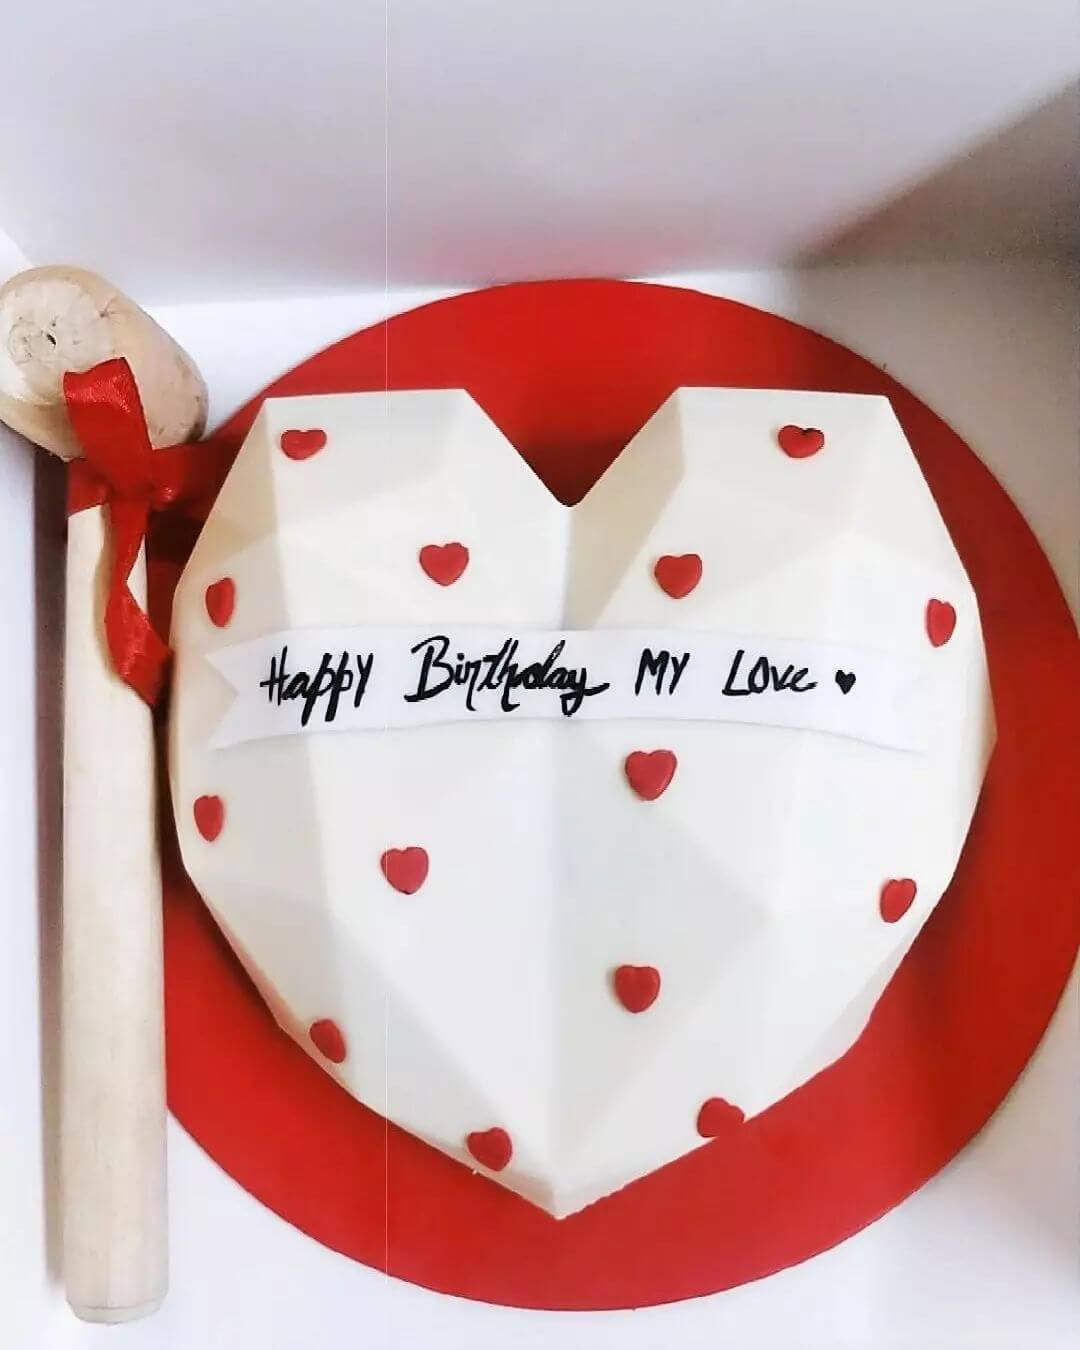 Pin by Alicja on cakes  Birthday cake for boyfriend Simple cake designs  Cake frosting designs